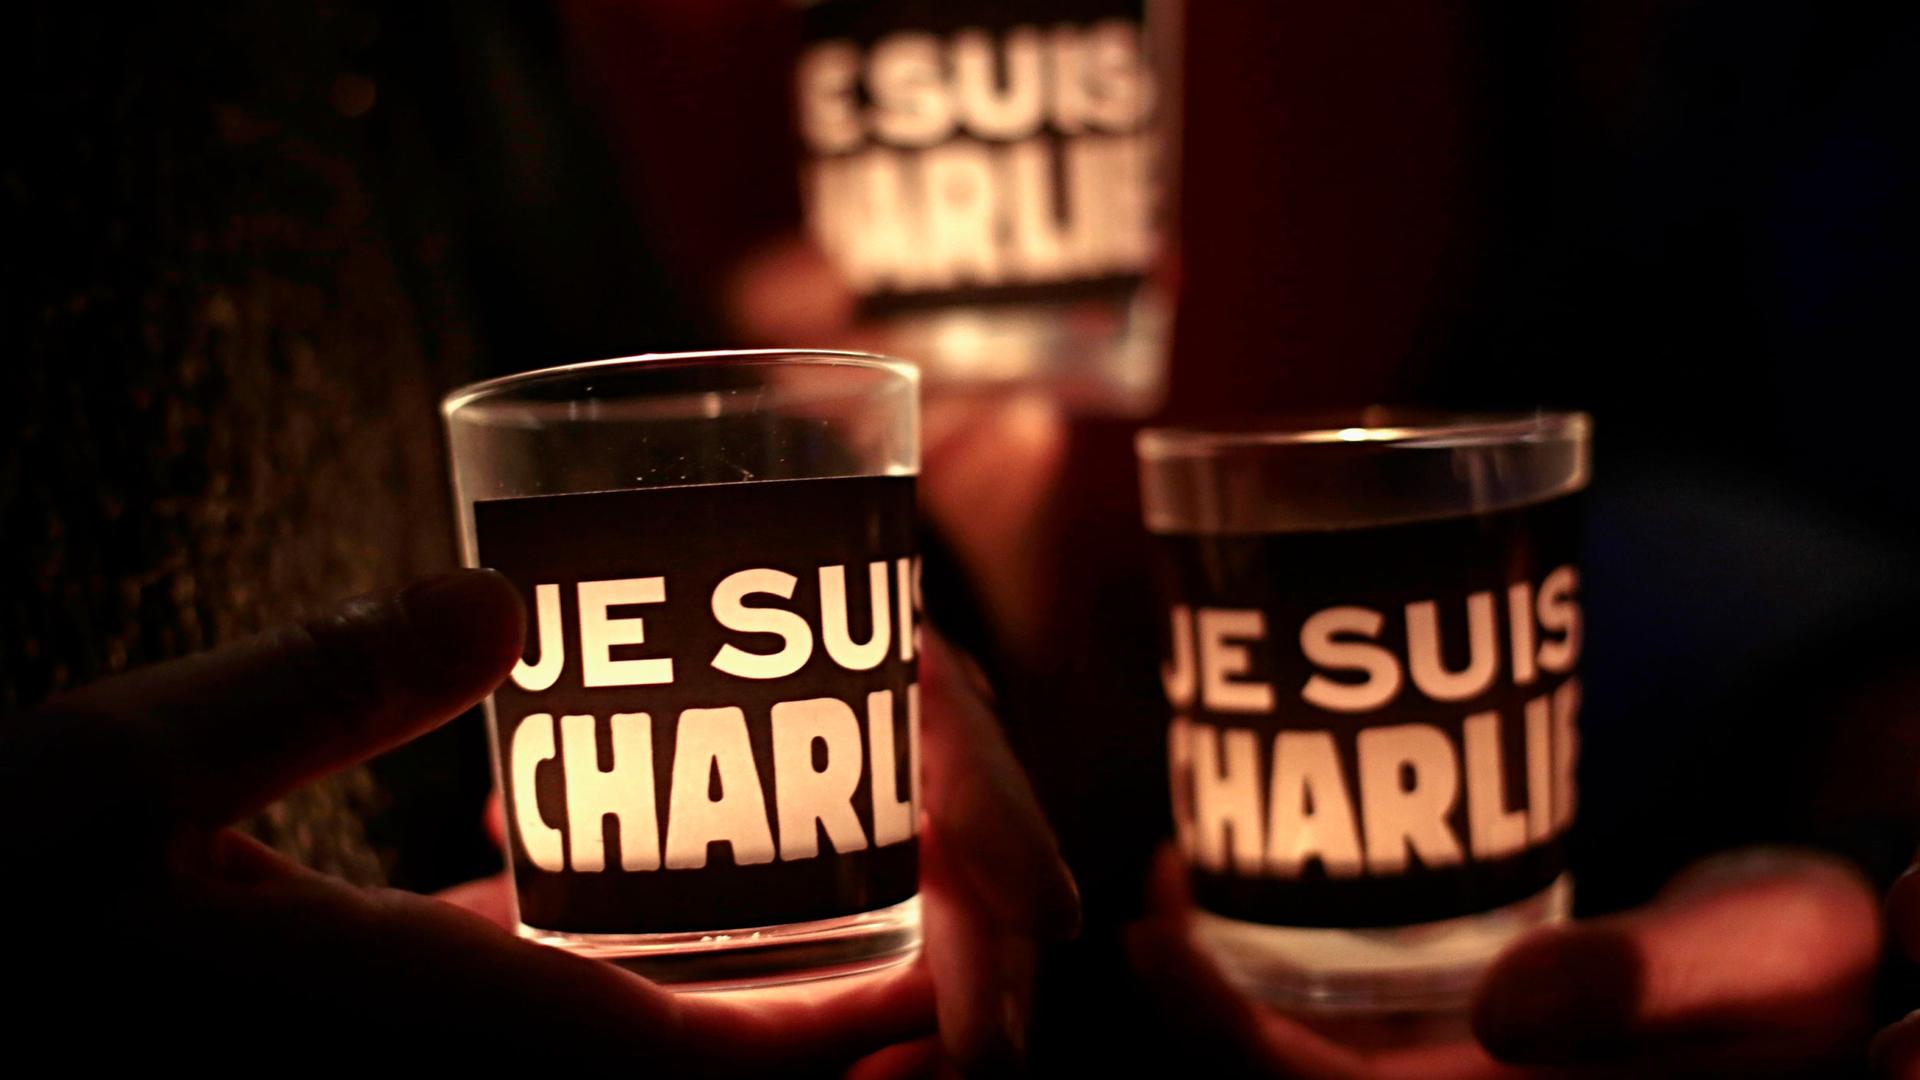 In a photograph taken in the dark, three glasses with candles glowing inside are shown with the phrase 'Je Suis Charlie' printed on it.